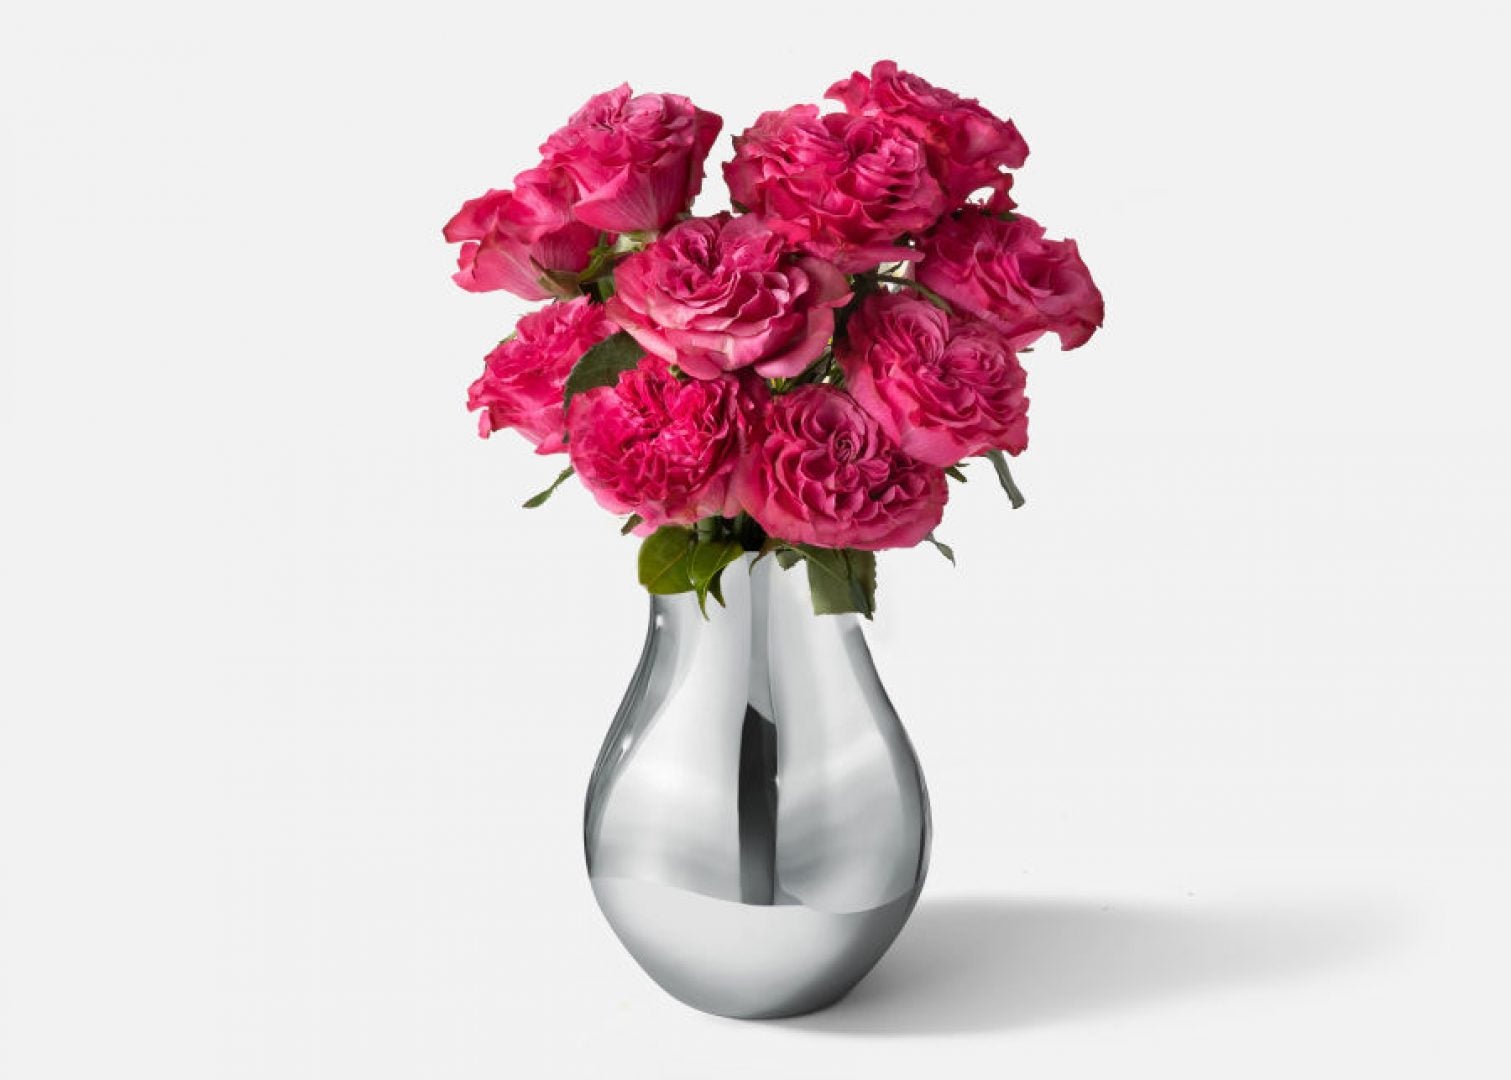 17 Showstopping Mother's Day Floral Arrangements For Every Type Of Mom